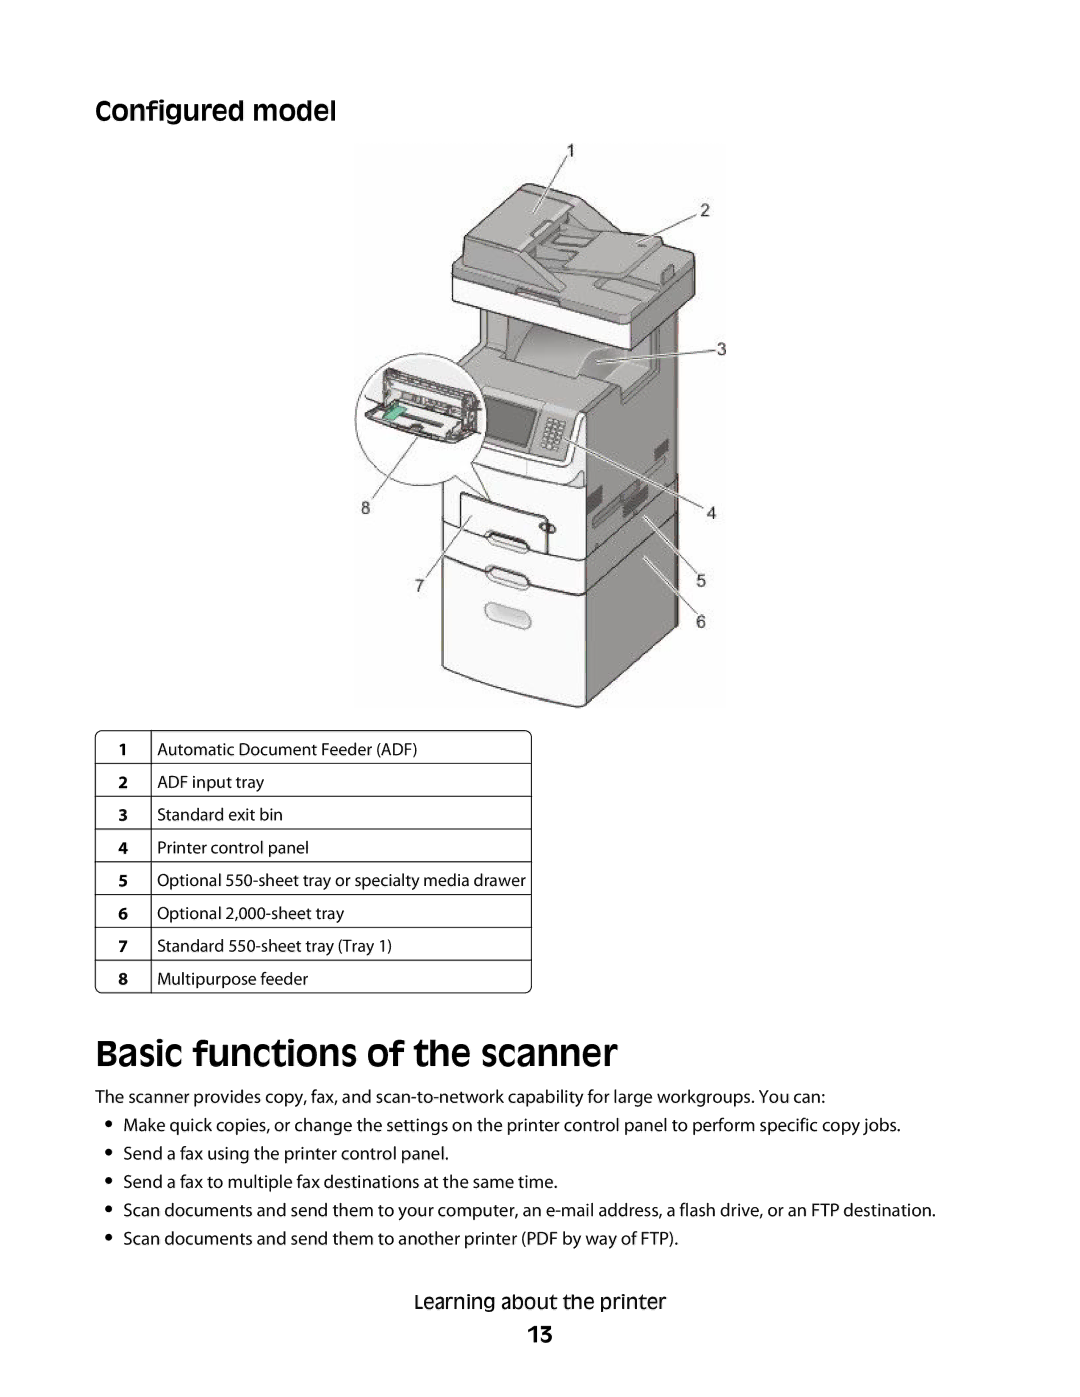 Lexmark MS00853, MS00859, MS00850, MS00855 manual Basic functions of the scanner, Configured model 